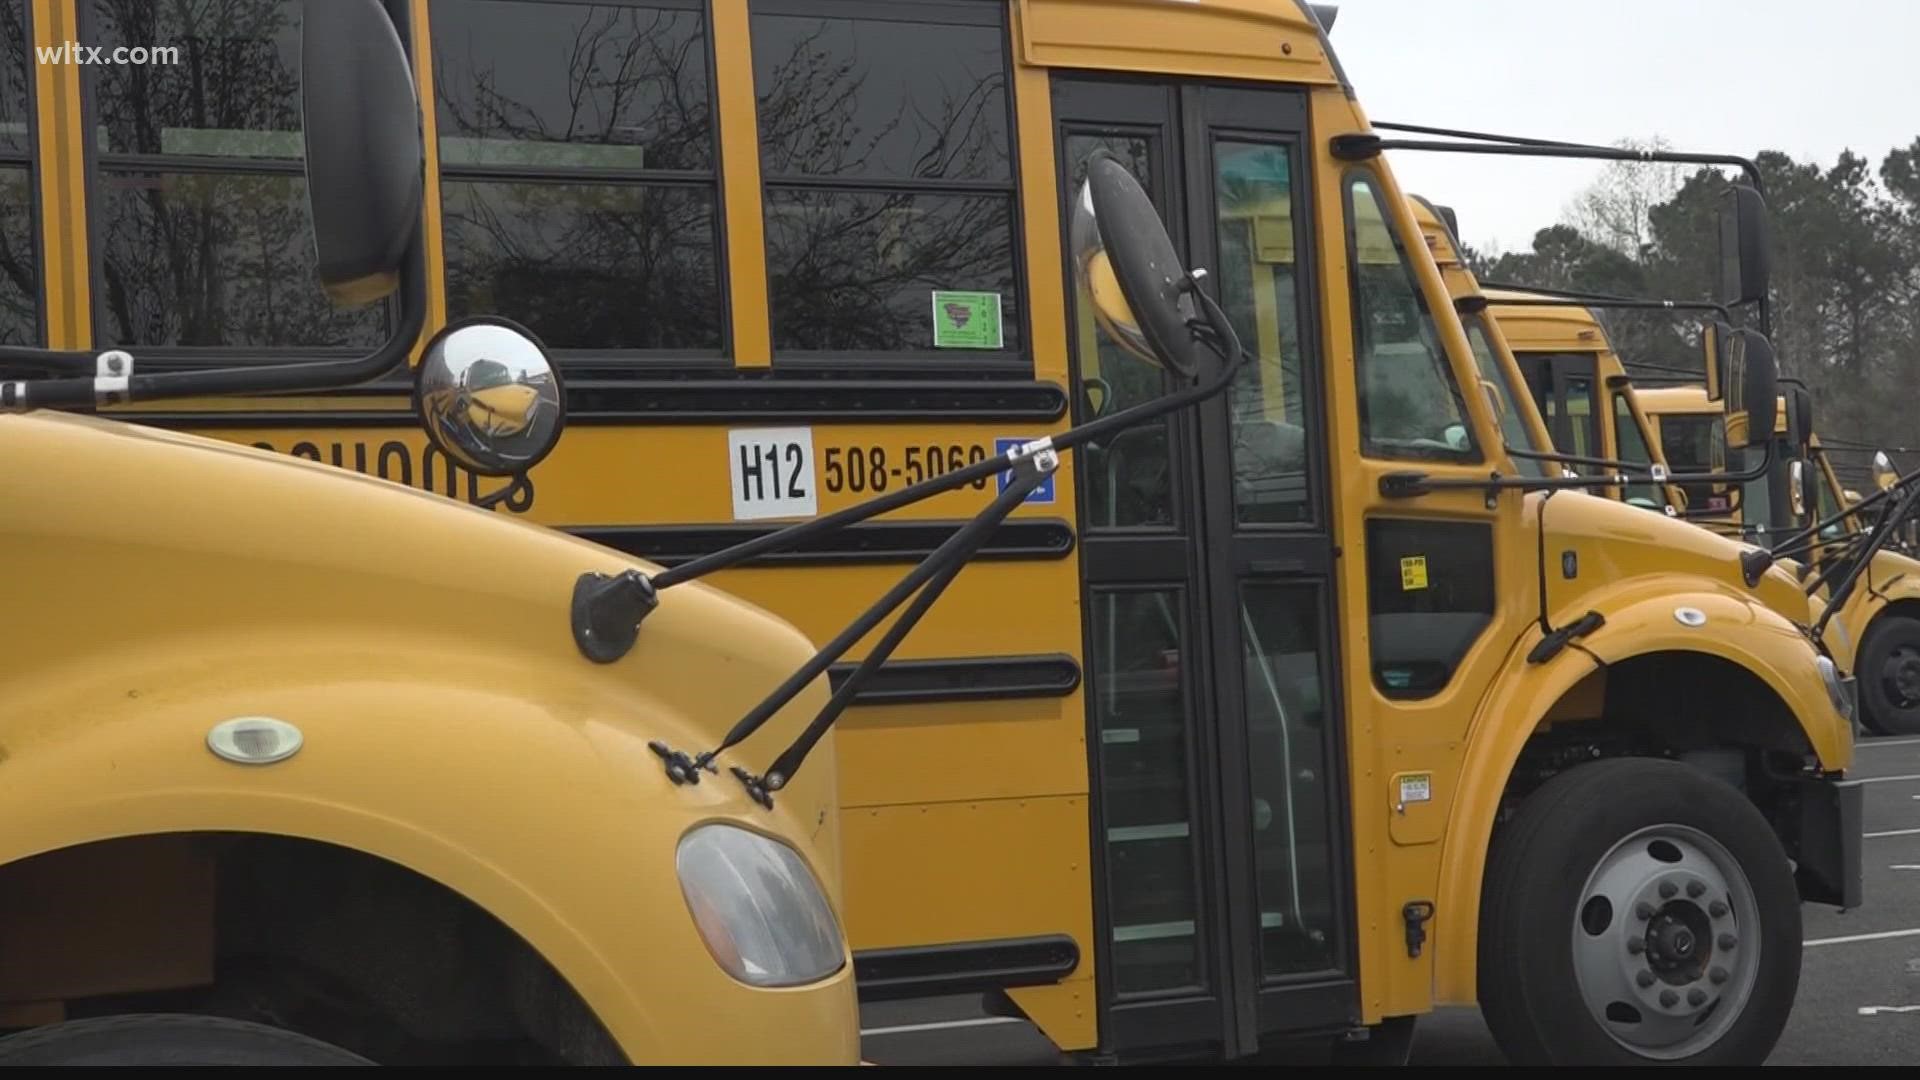 The Orangeburg County School District will purchase four electric school buses, thanks to $1.2 million from the U.S. Environmental Protection Agency (EPA).